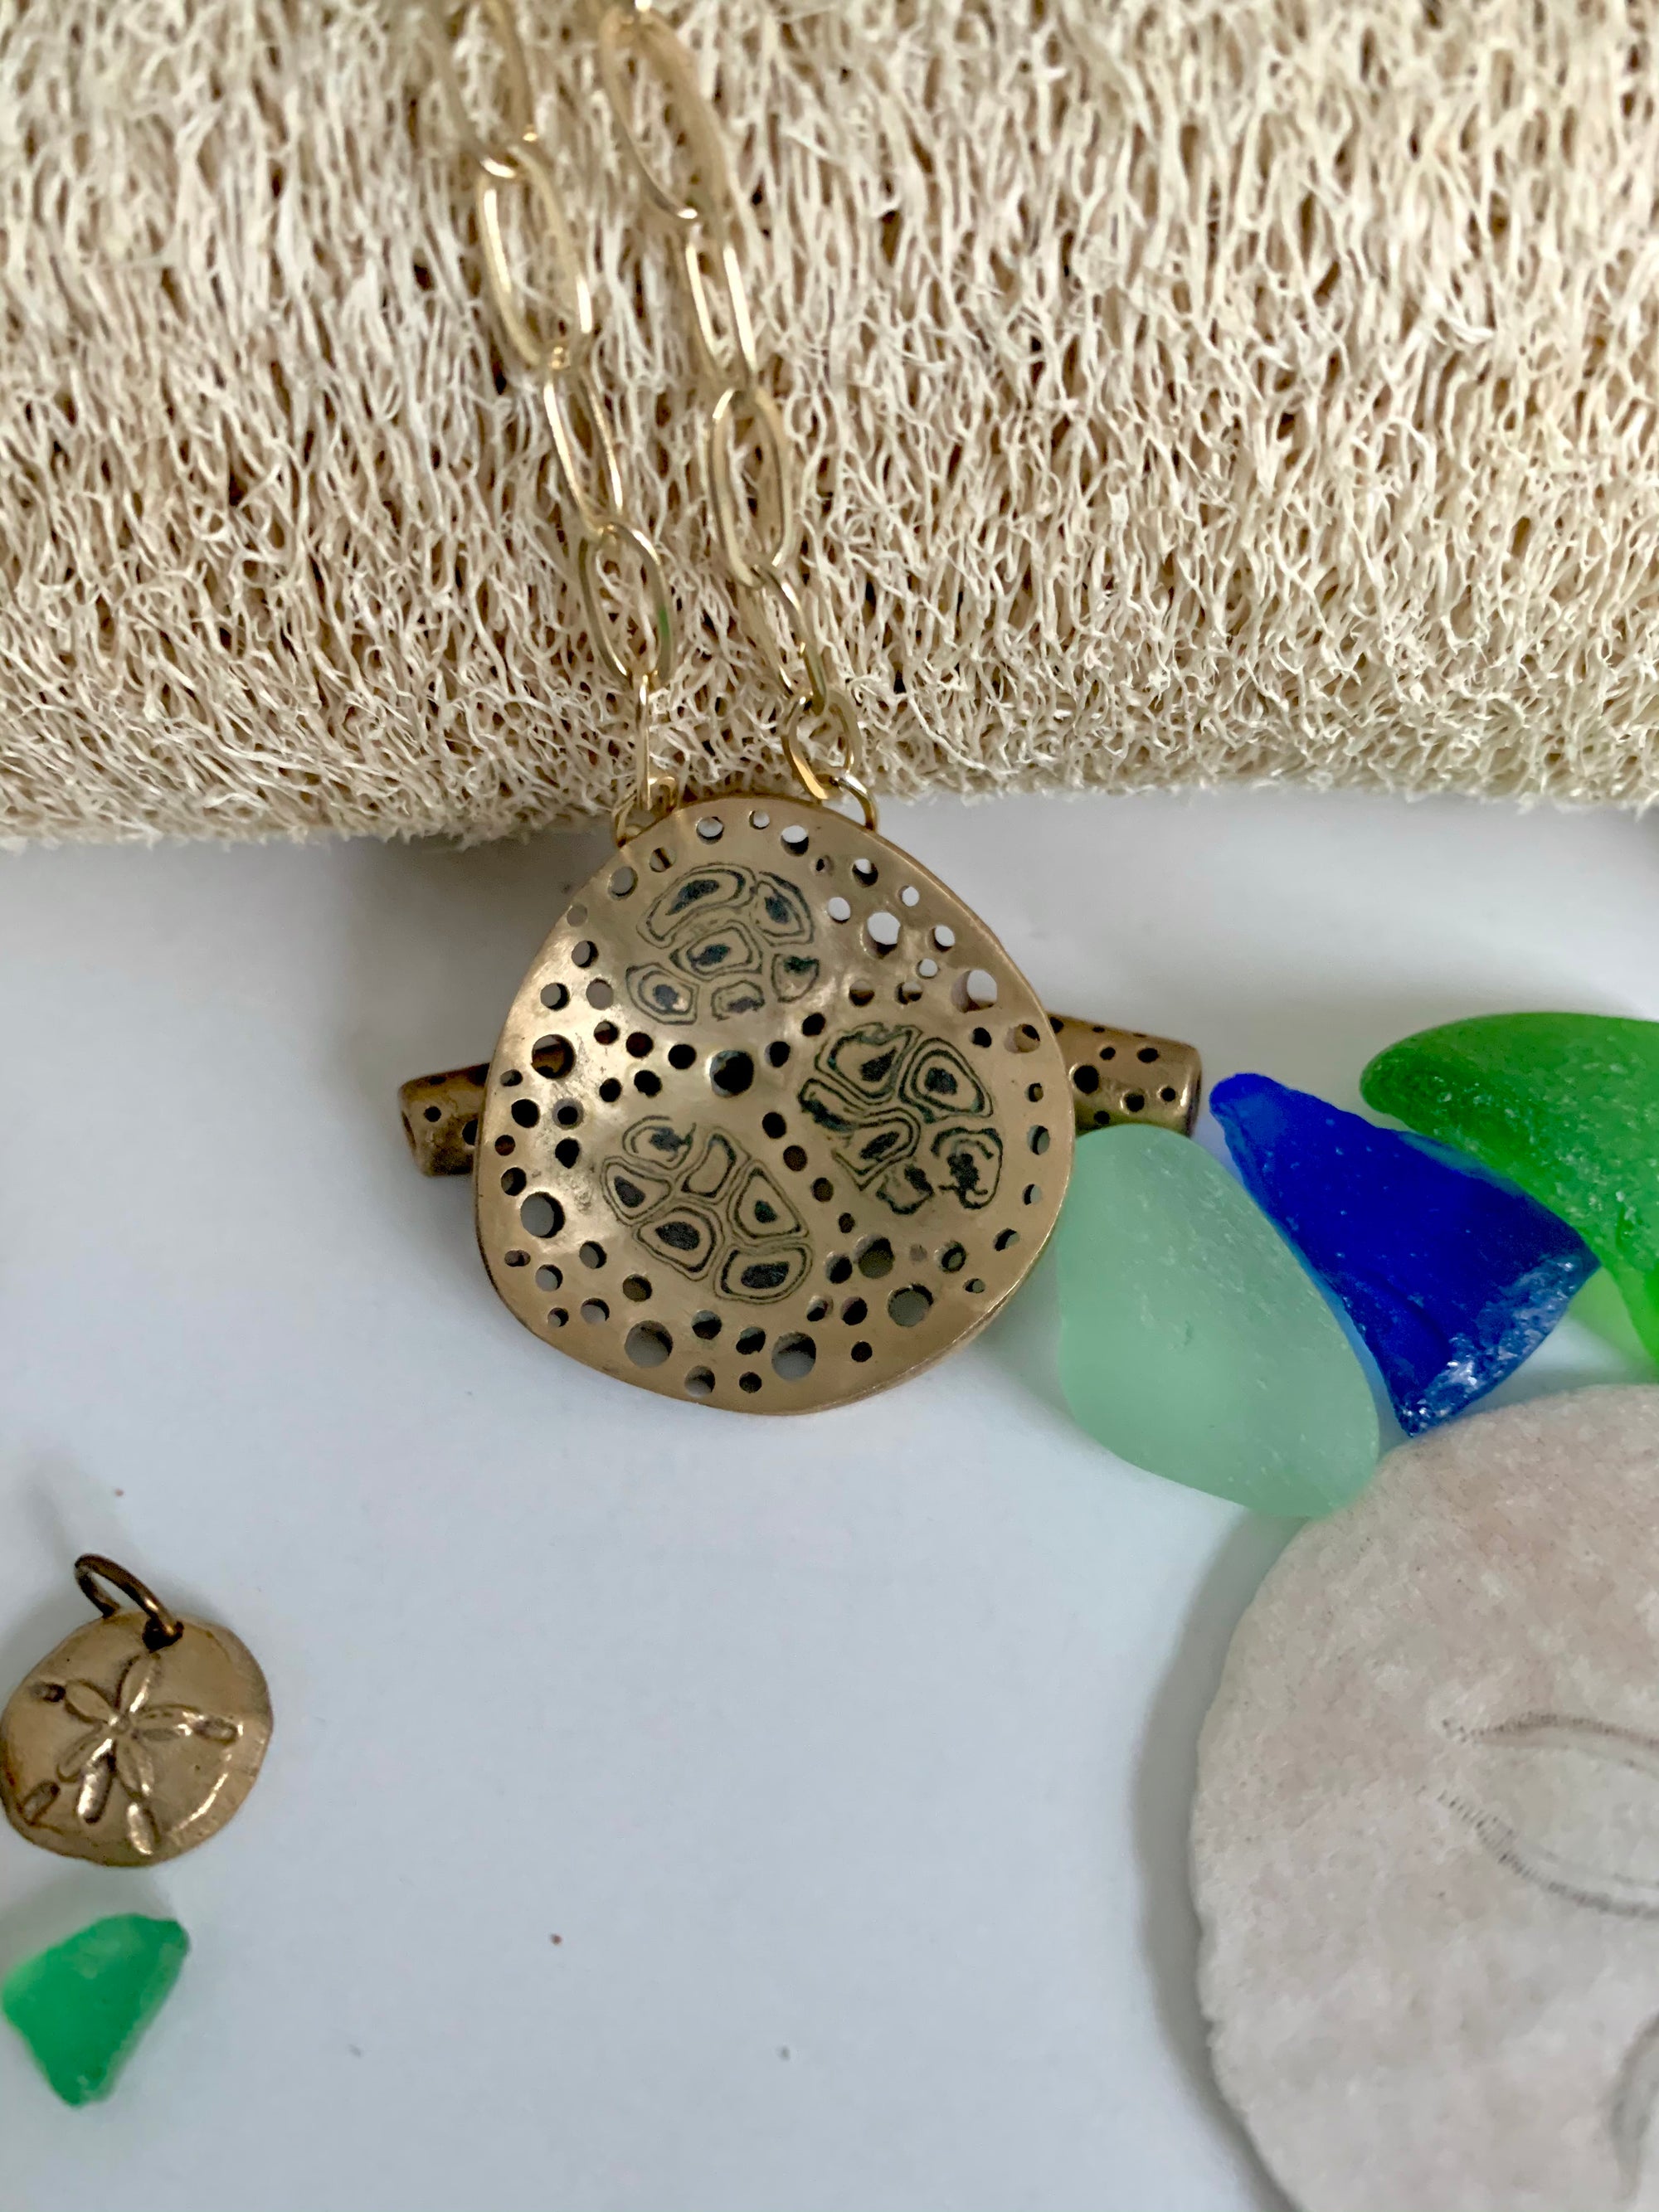 One of a kind art jewelry necklace inspired by loofah sponge